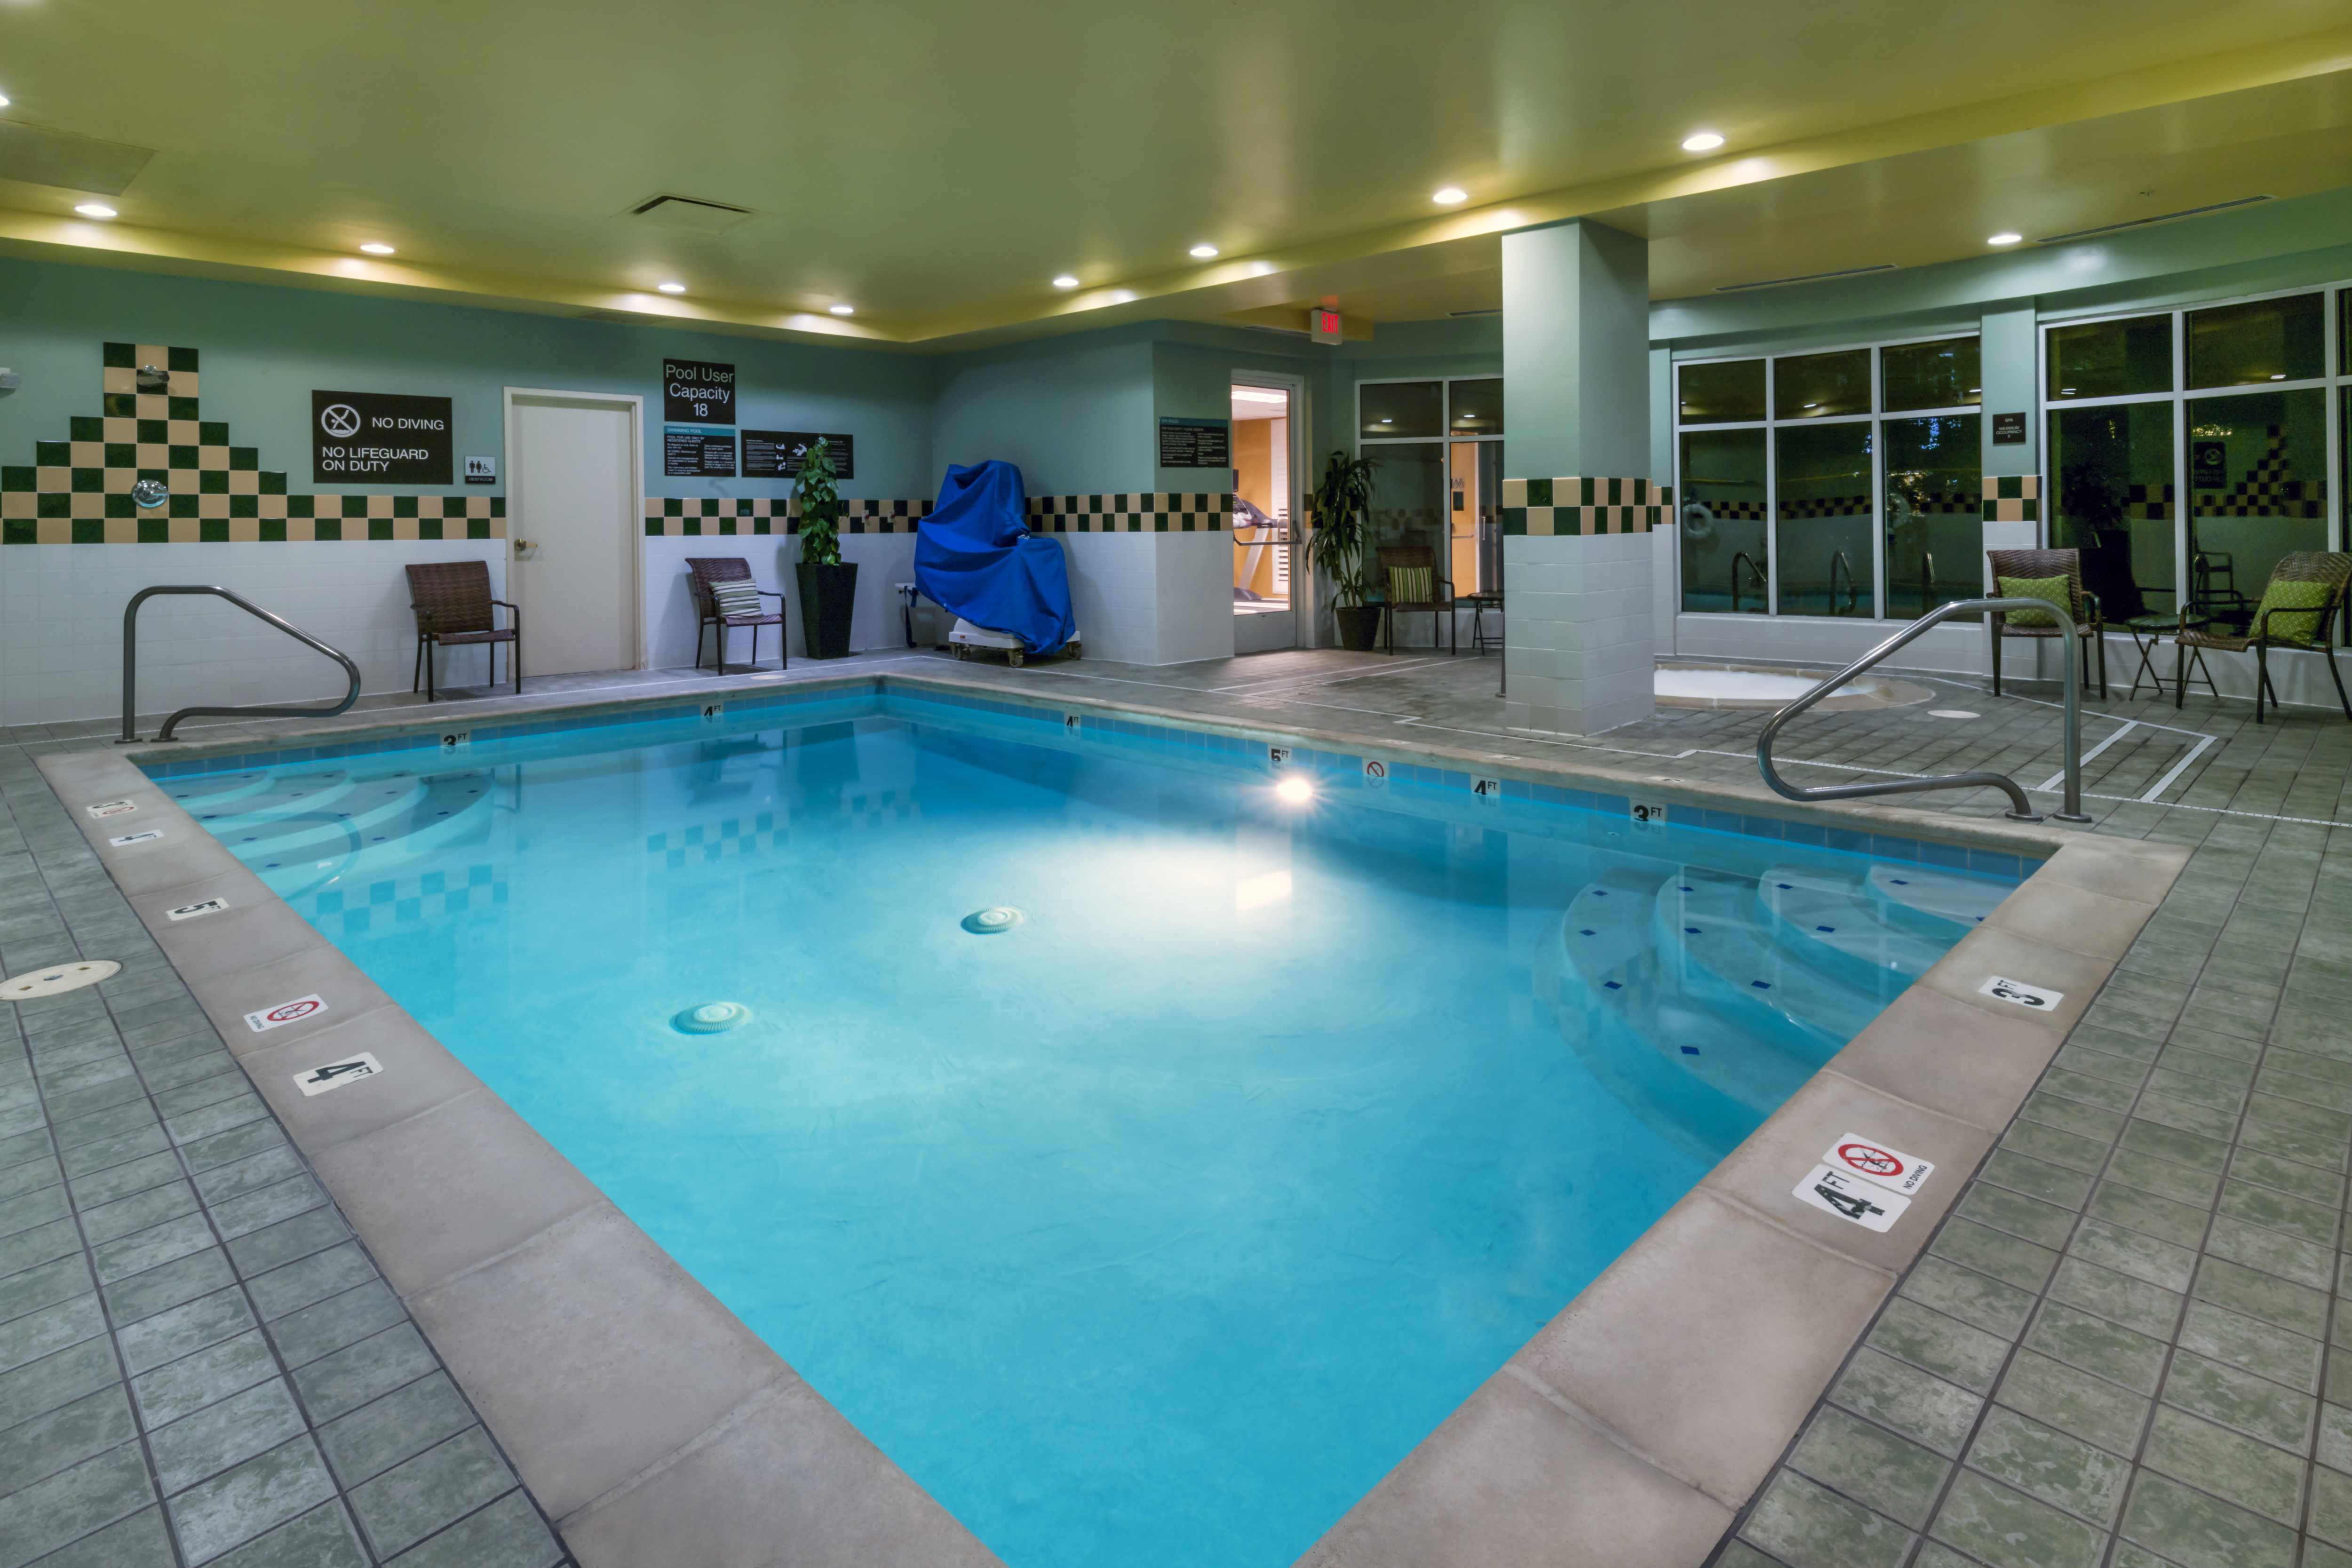 Indoor Pool with Lights in Evening With Chairs